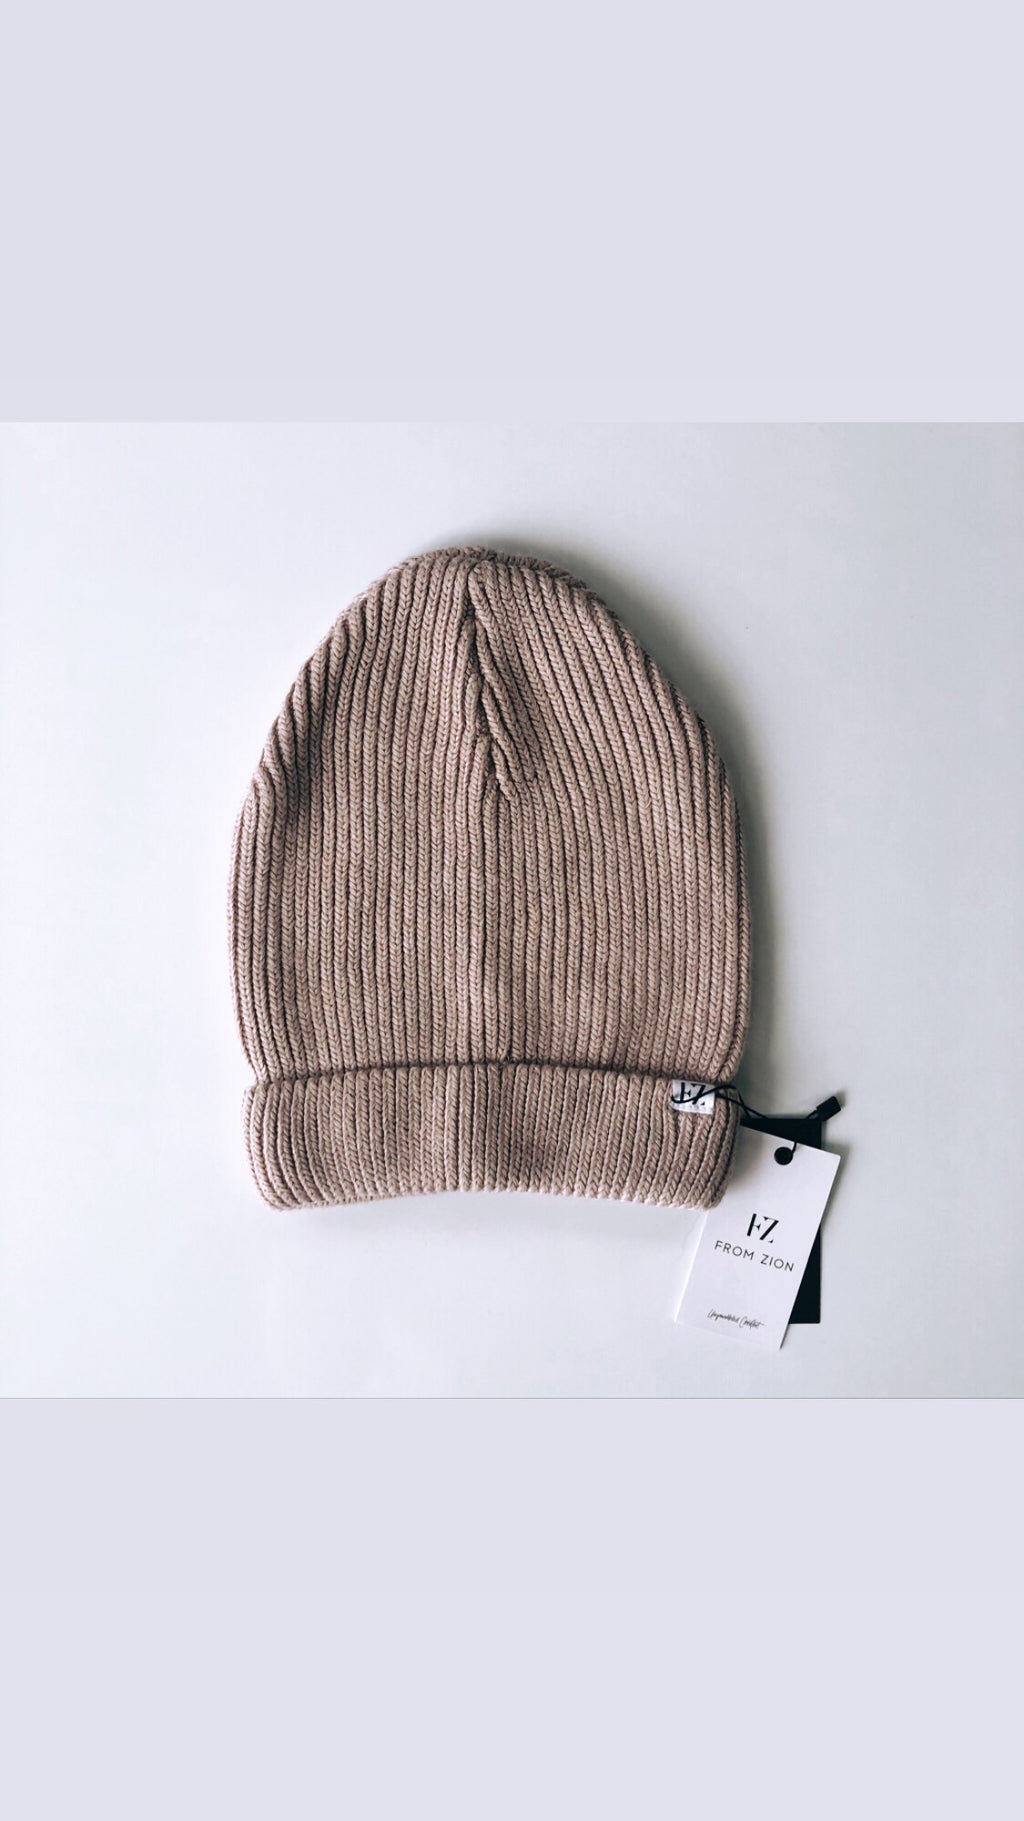 From Zion - Barley Knit Beanie